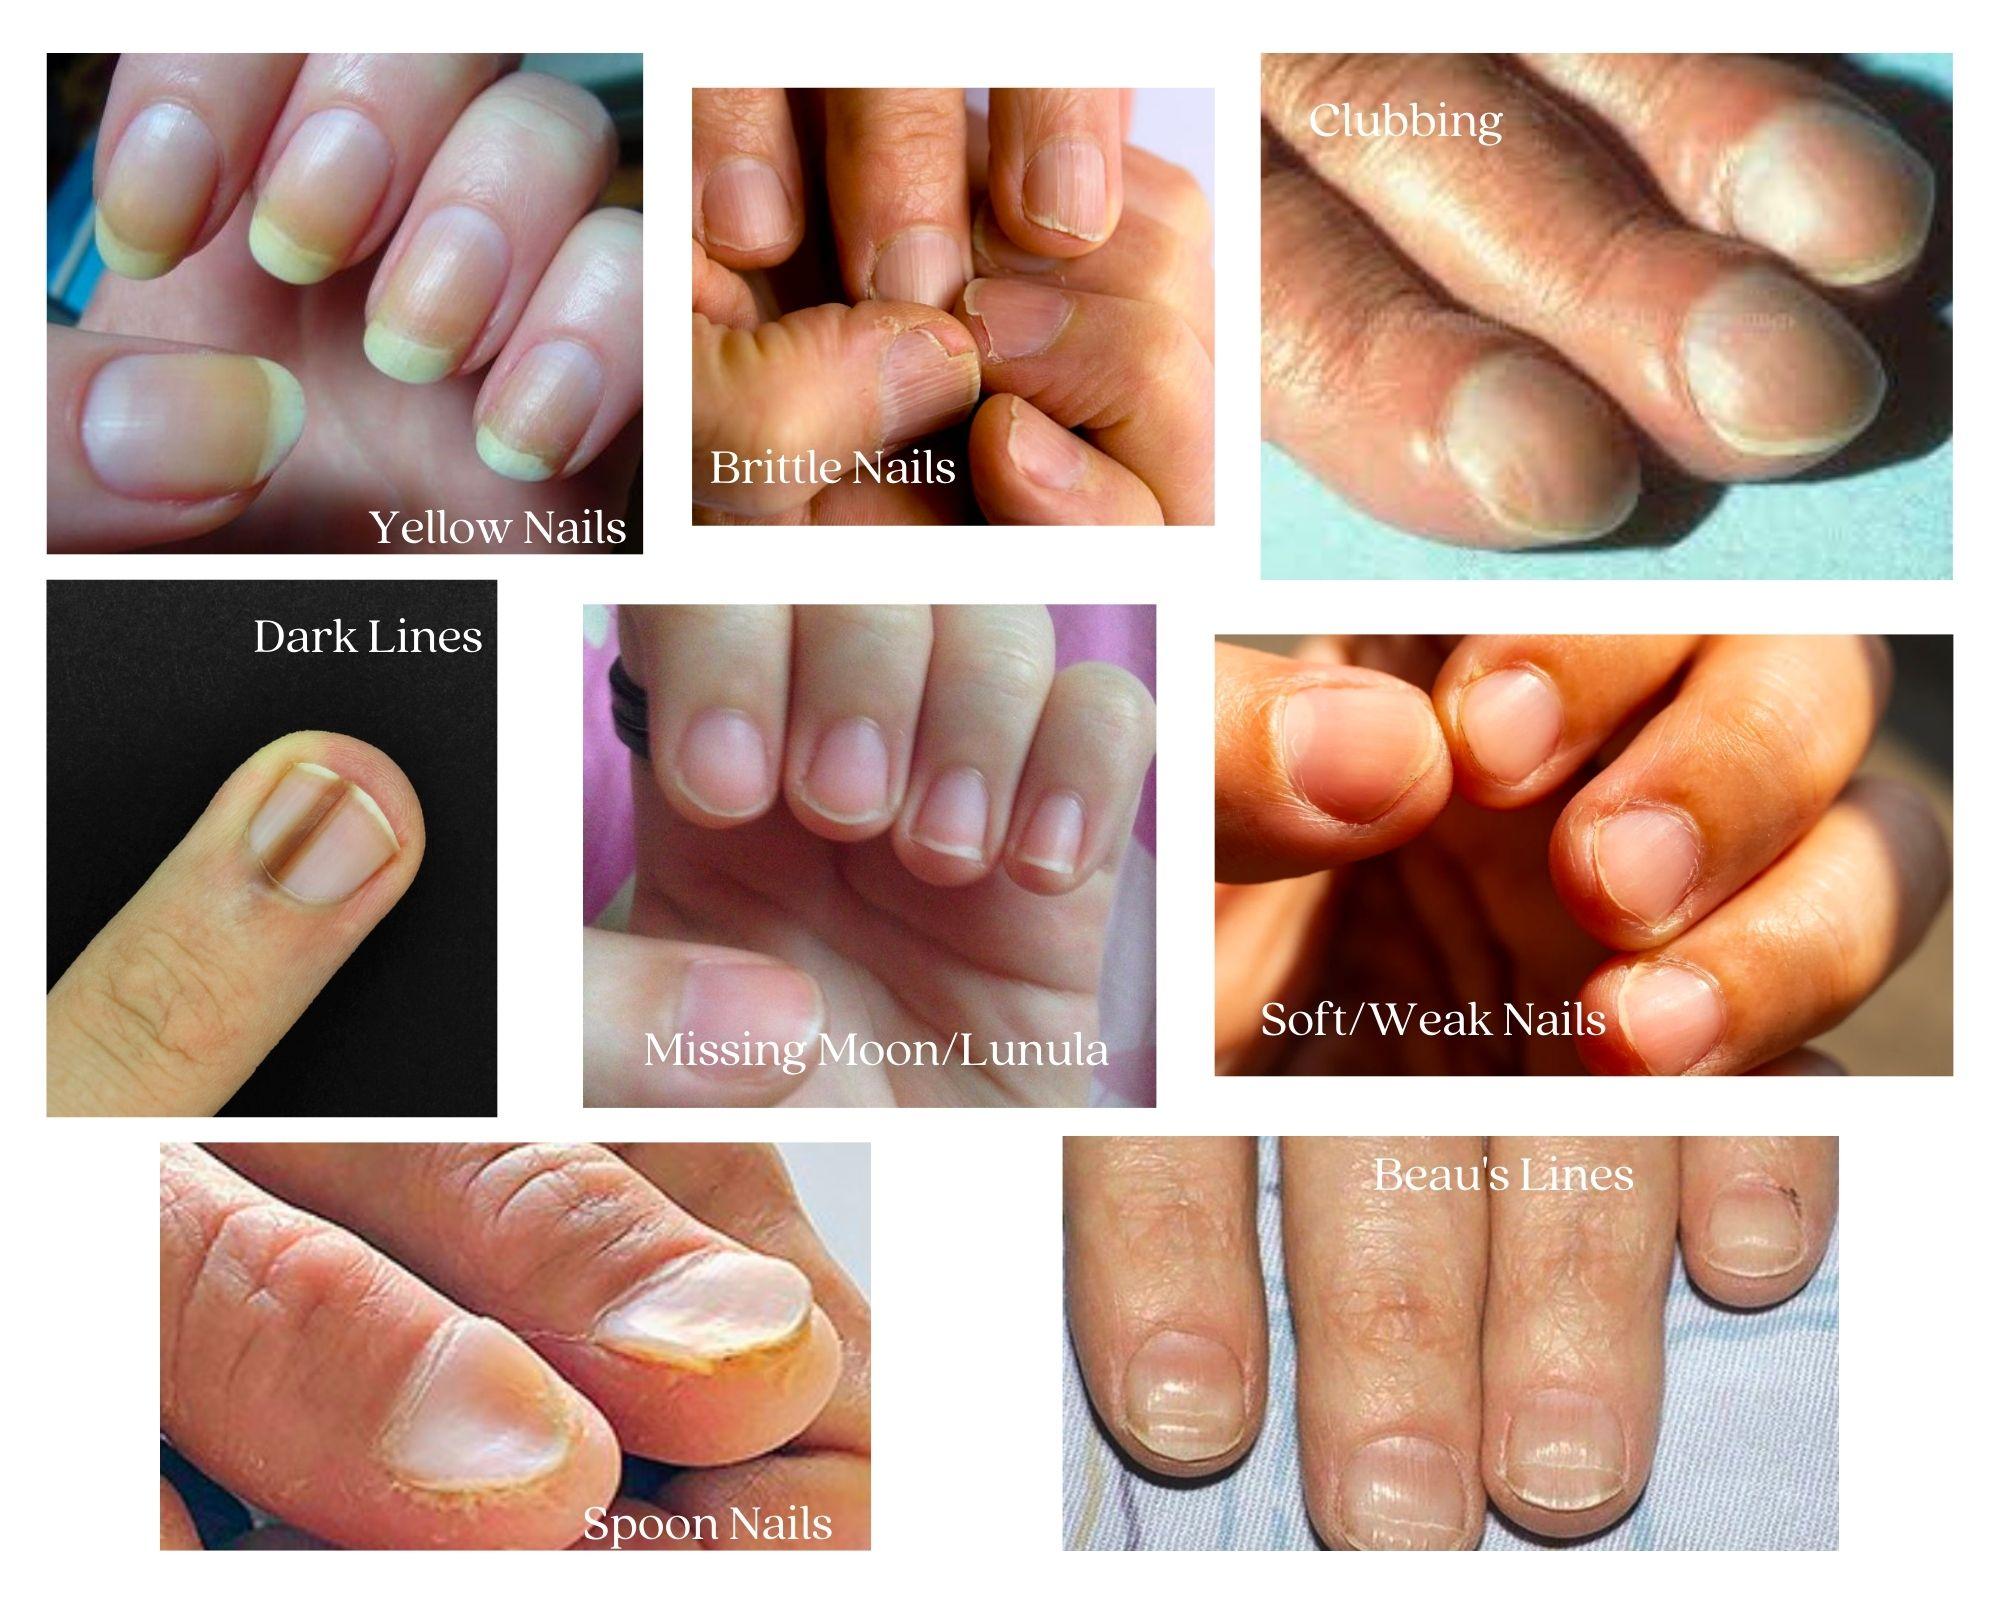 Home Remedies for Brittle Nails Caused by Nutritional Deficiencies - YouTube